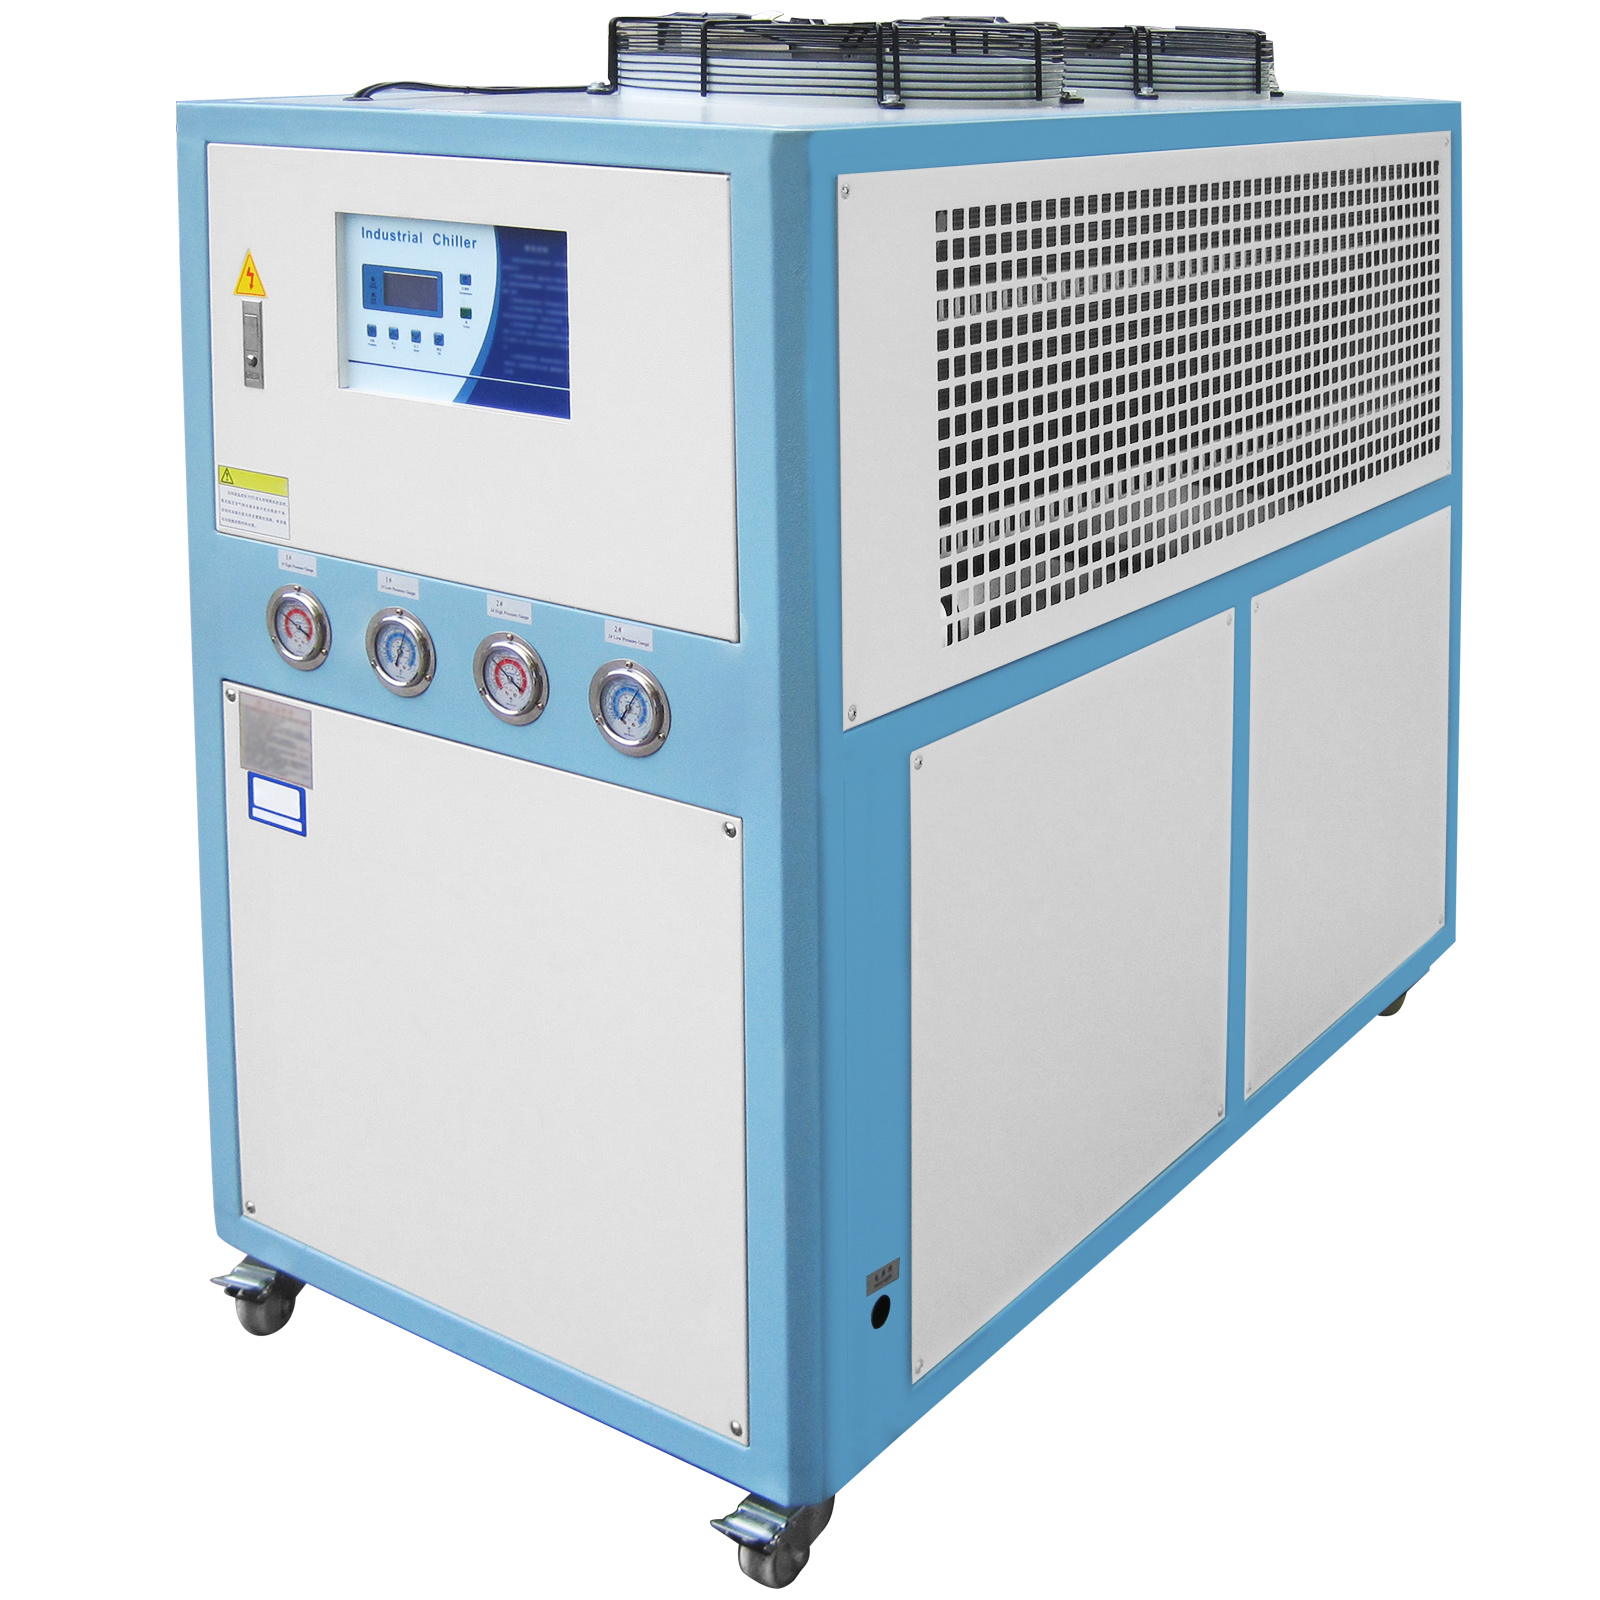 10 Ton Air-cooled Industrial Chiller 30kw Lcd 145l Water Tank Stainless Steel от Vevor Many GEOs